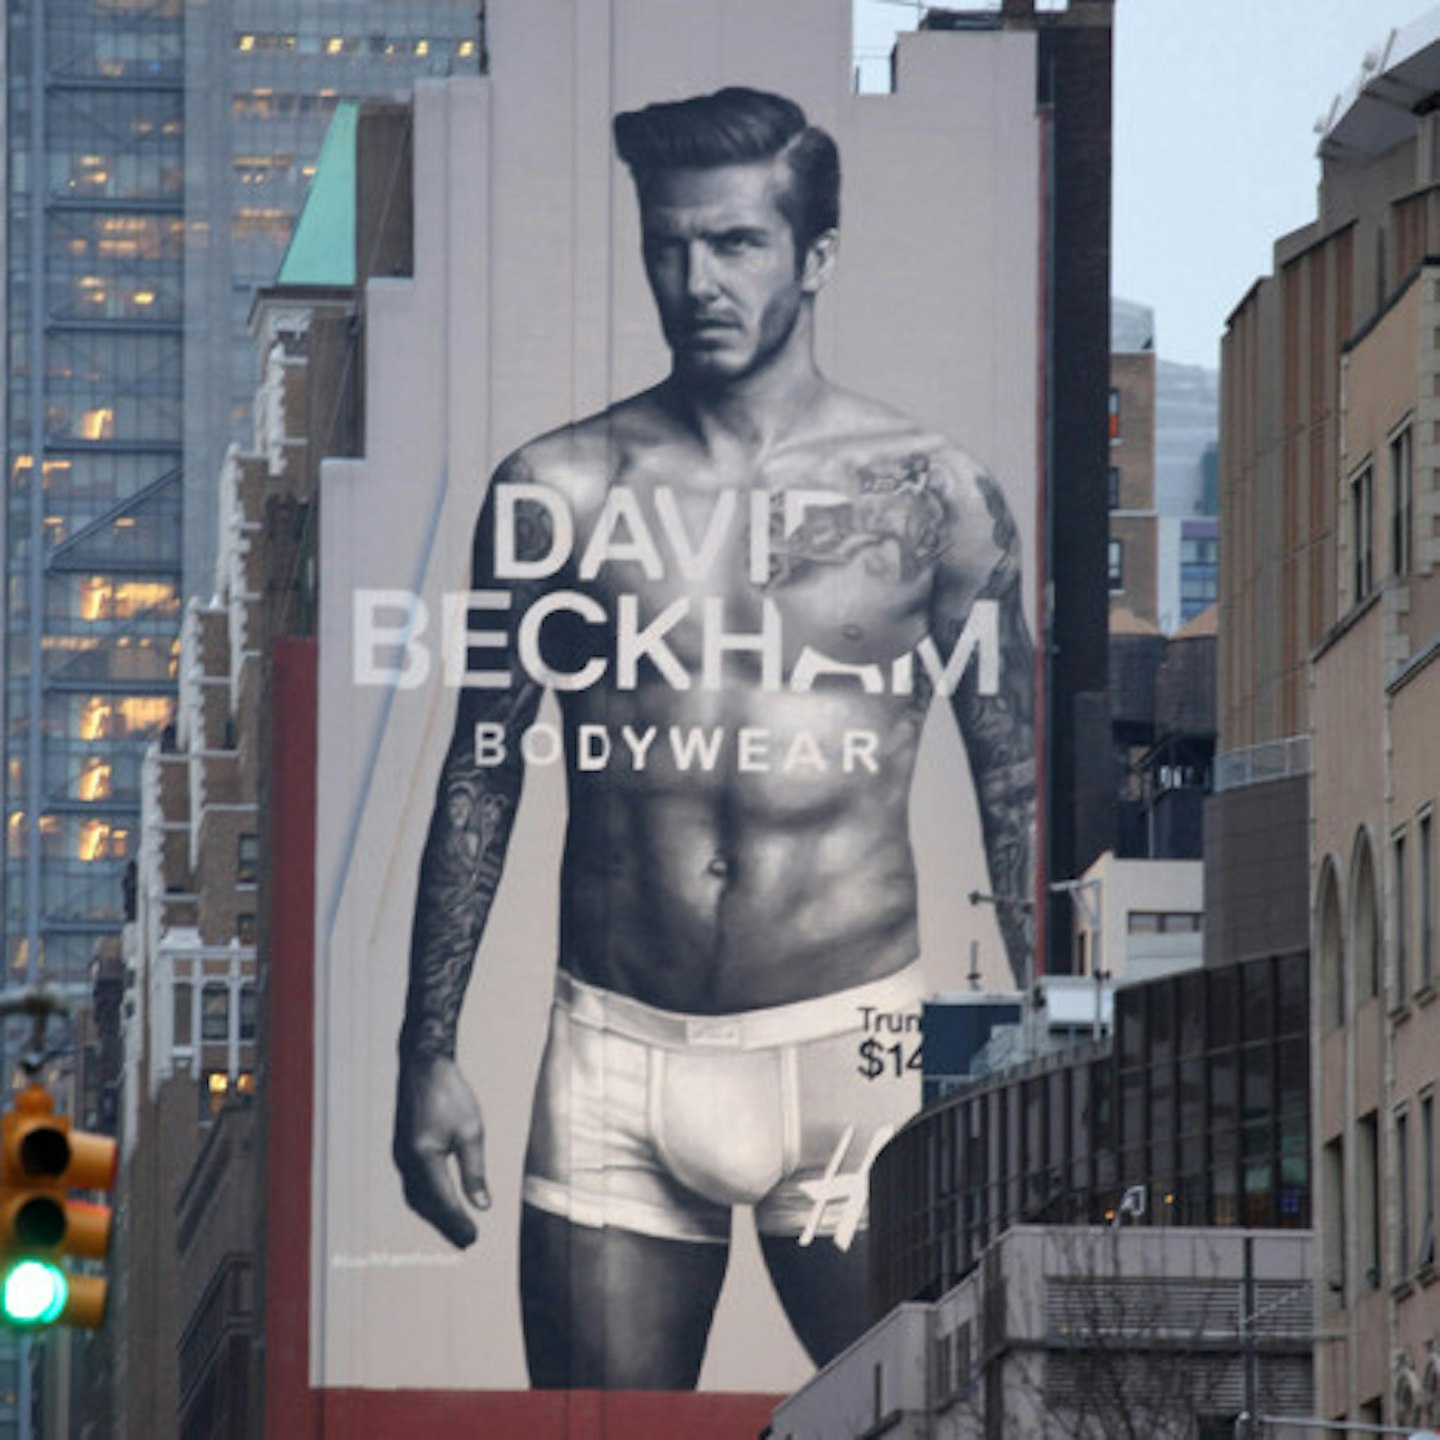 These days, Becks is no stranger to posing in his small pants